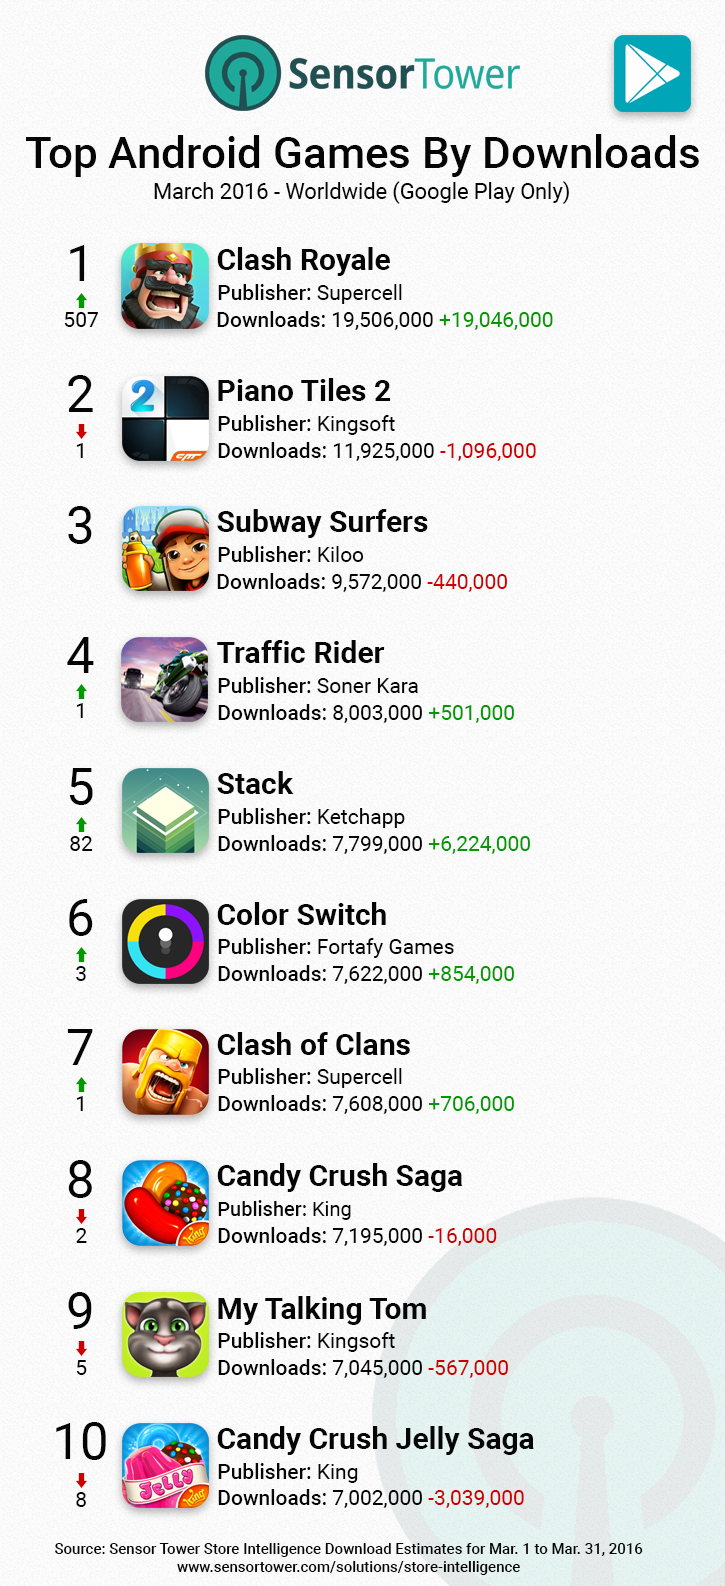 Google Play Games Top Downloads Worldwide March 2016